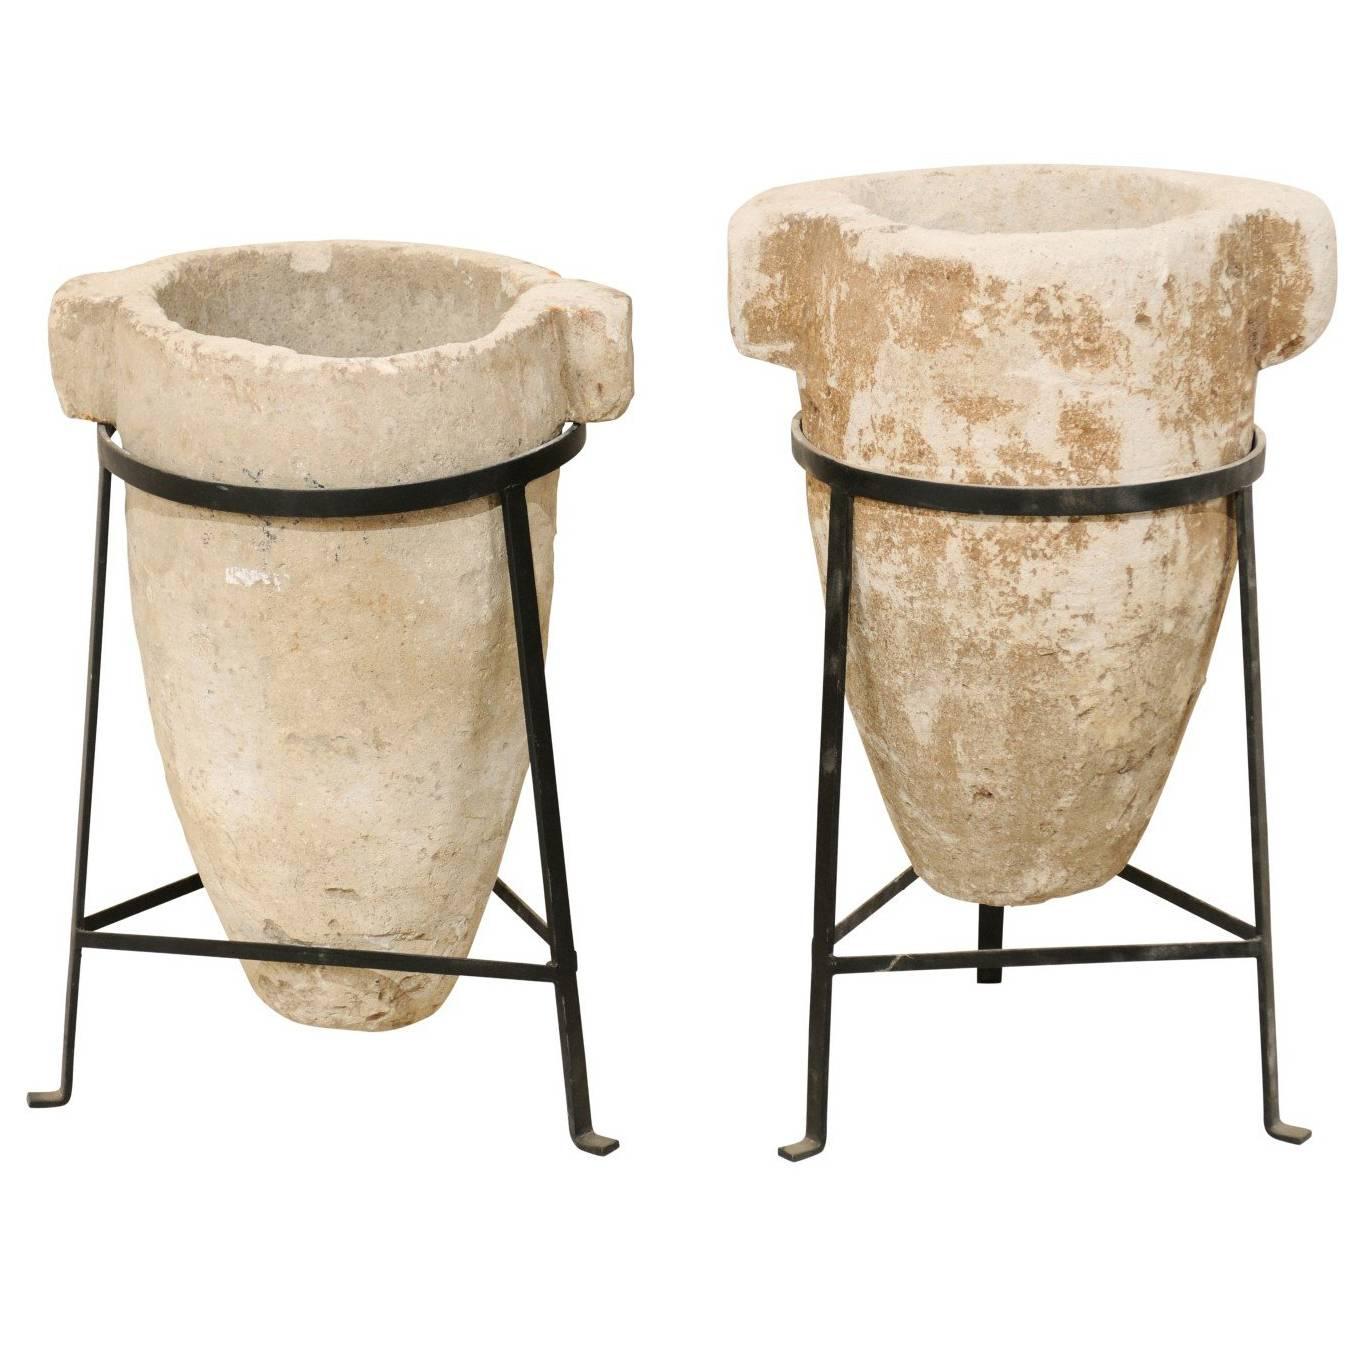 Pair of 19th Century Spanish Colonial Stone Water Filters